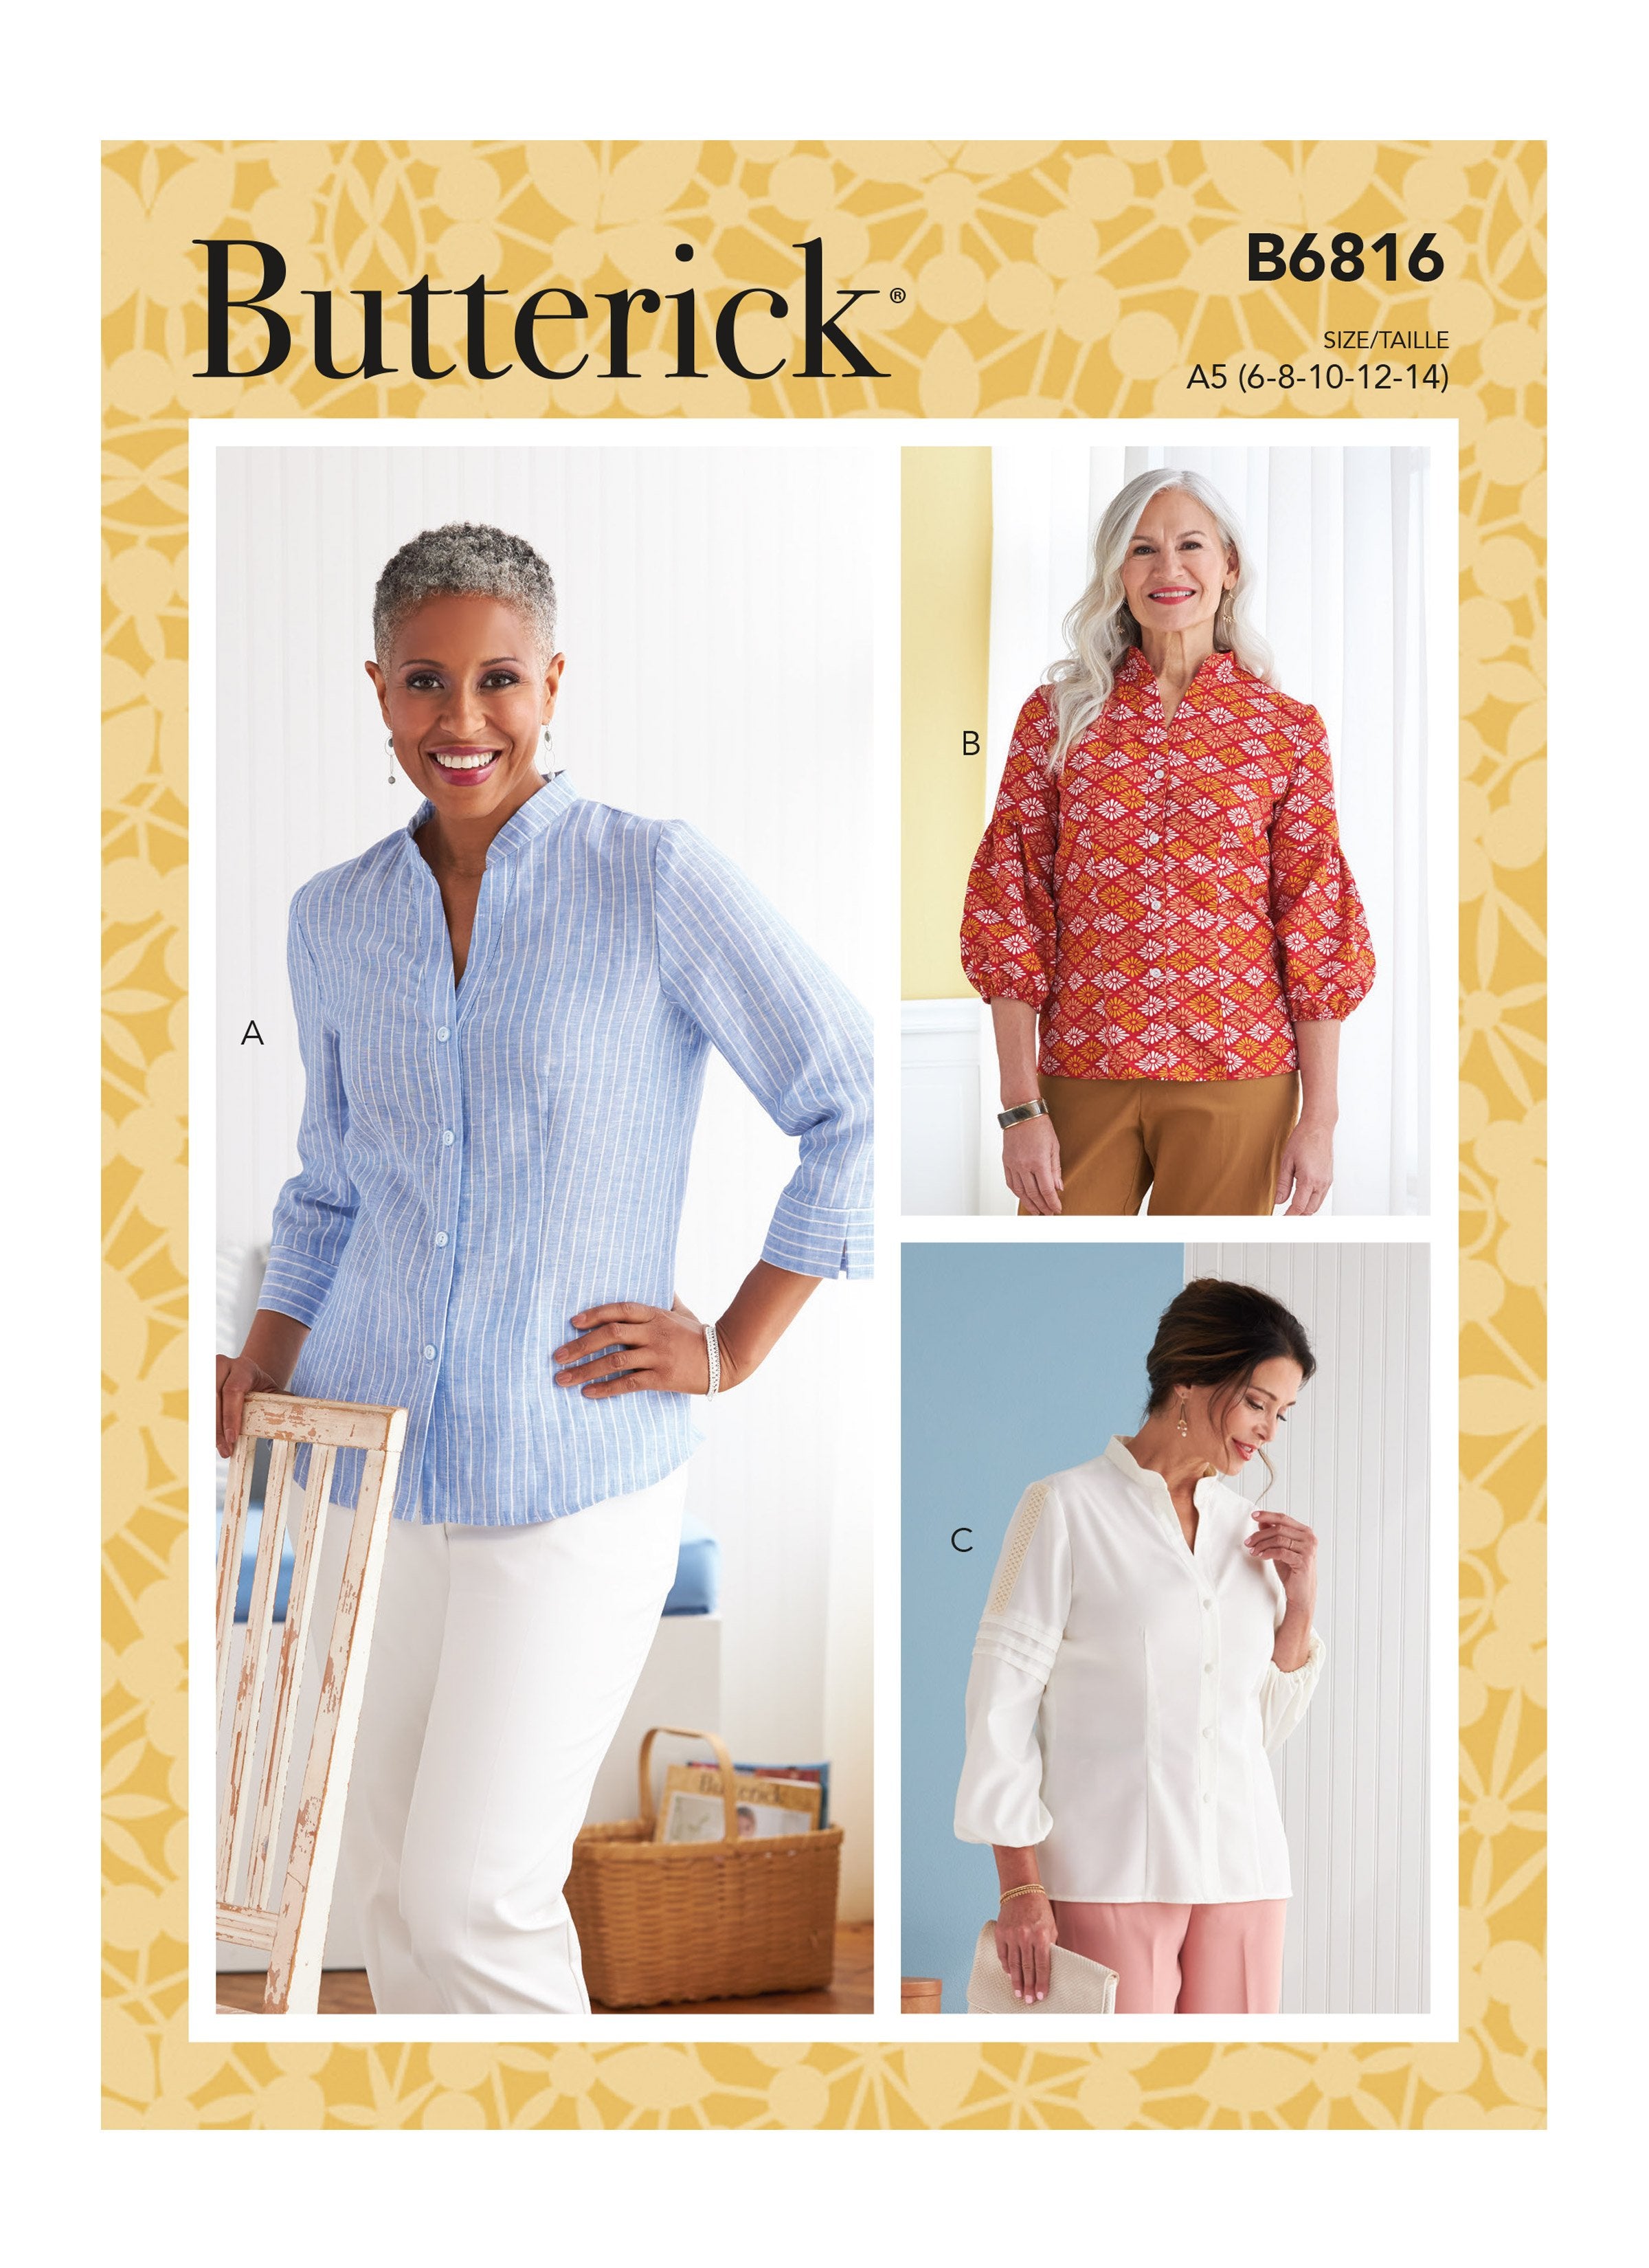 Butterick 6816 Misses Tops pattern from Jaycotts Sewing Supplies